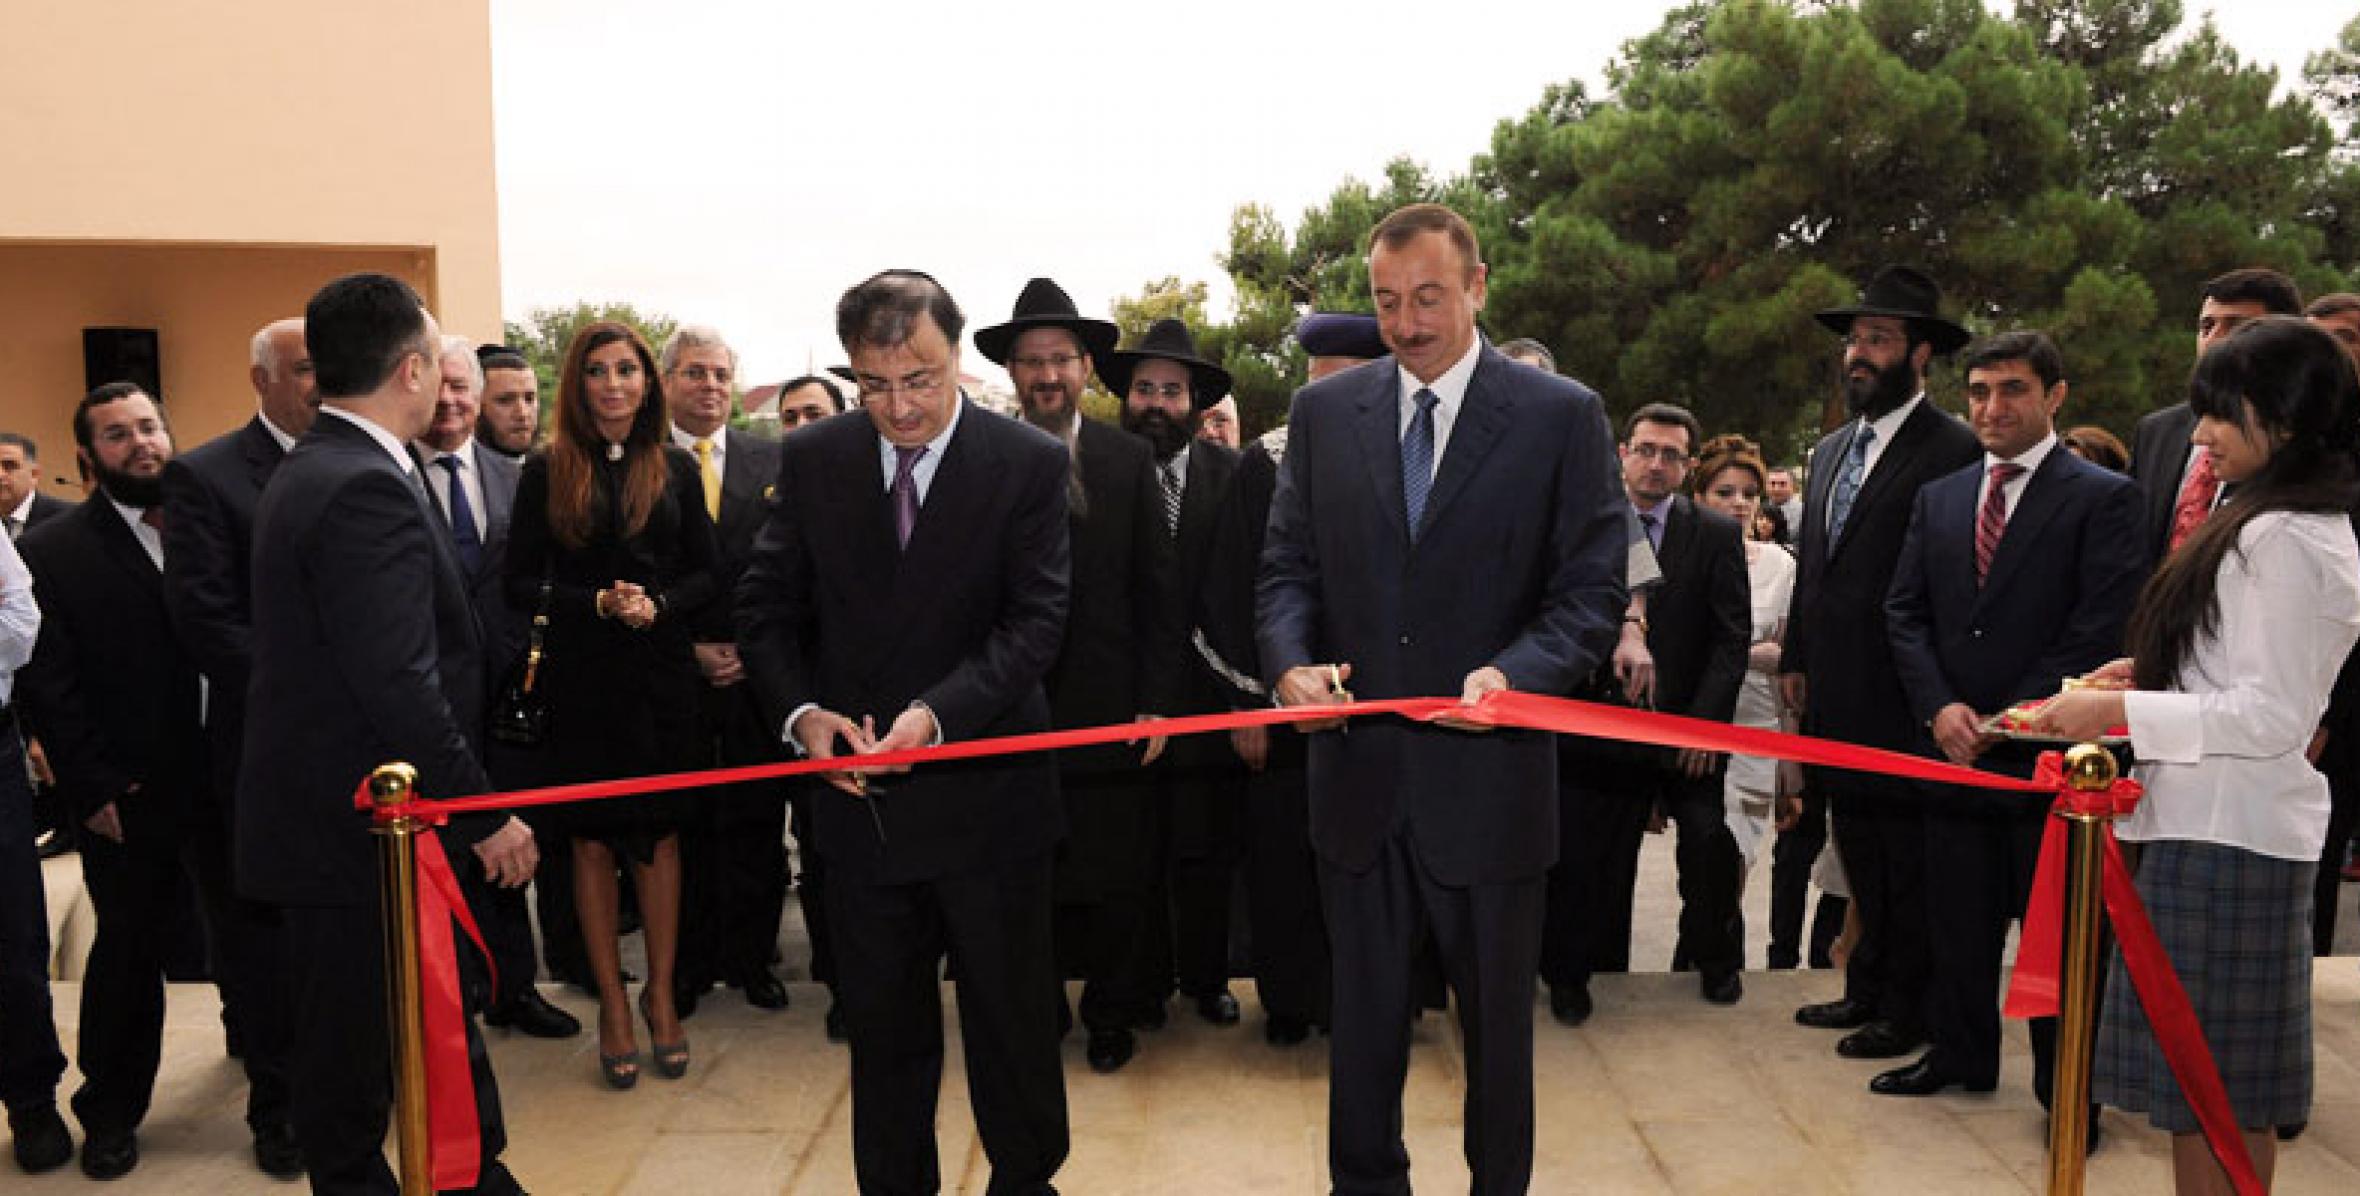 Ilham Aliyev attended the opening of the Chabad Ohr-Avner education center for Jewish children